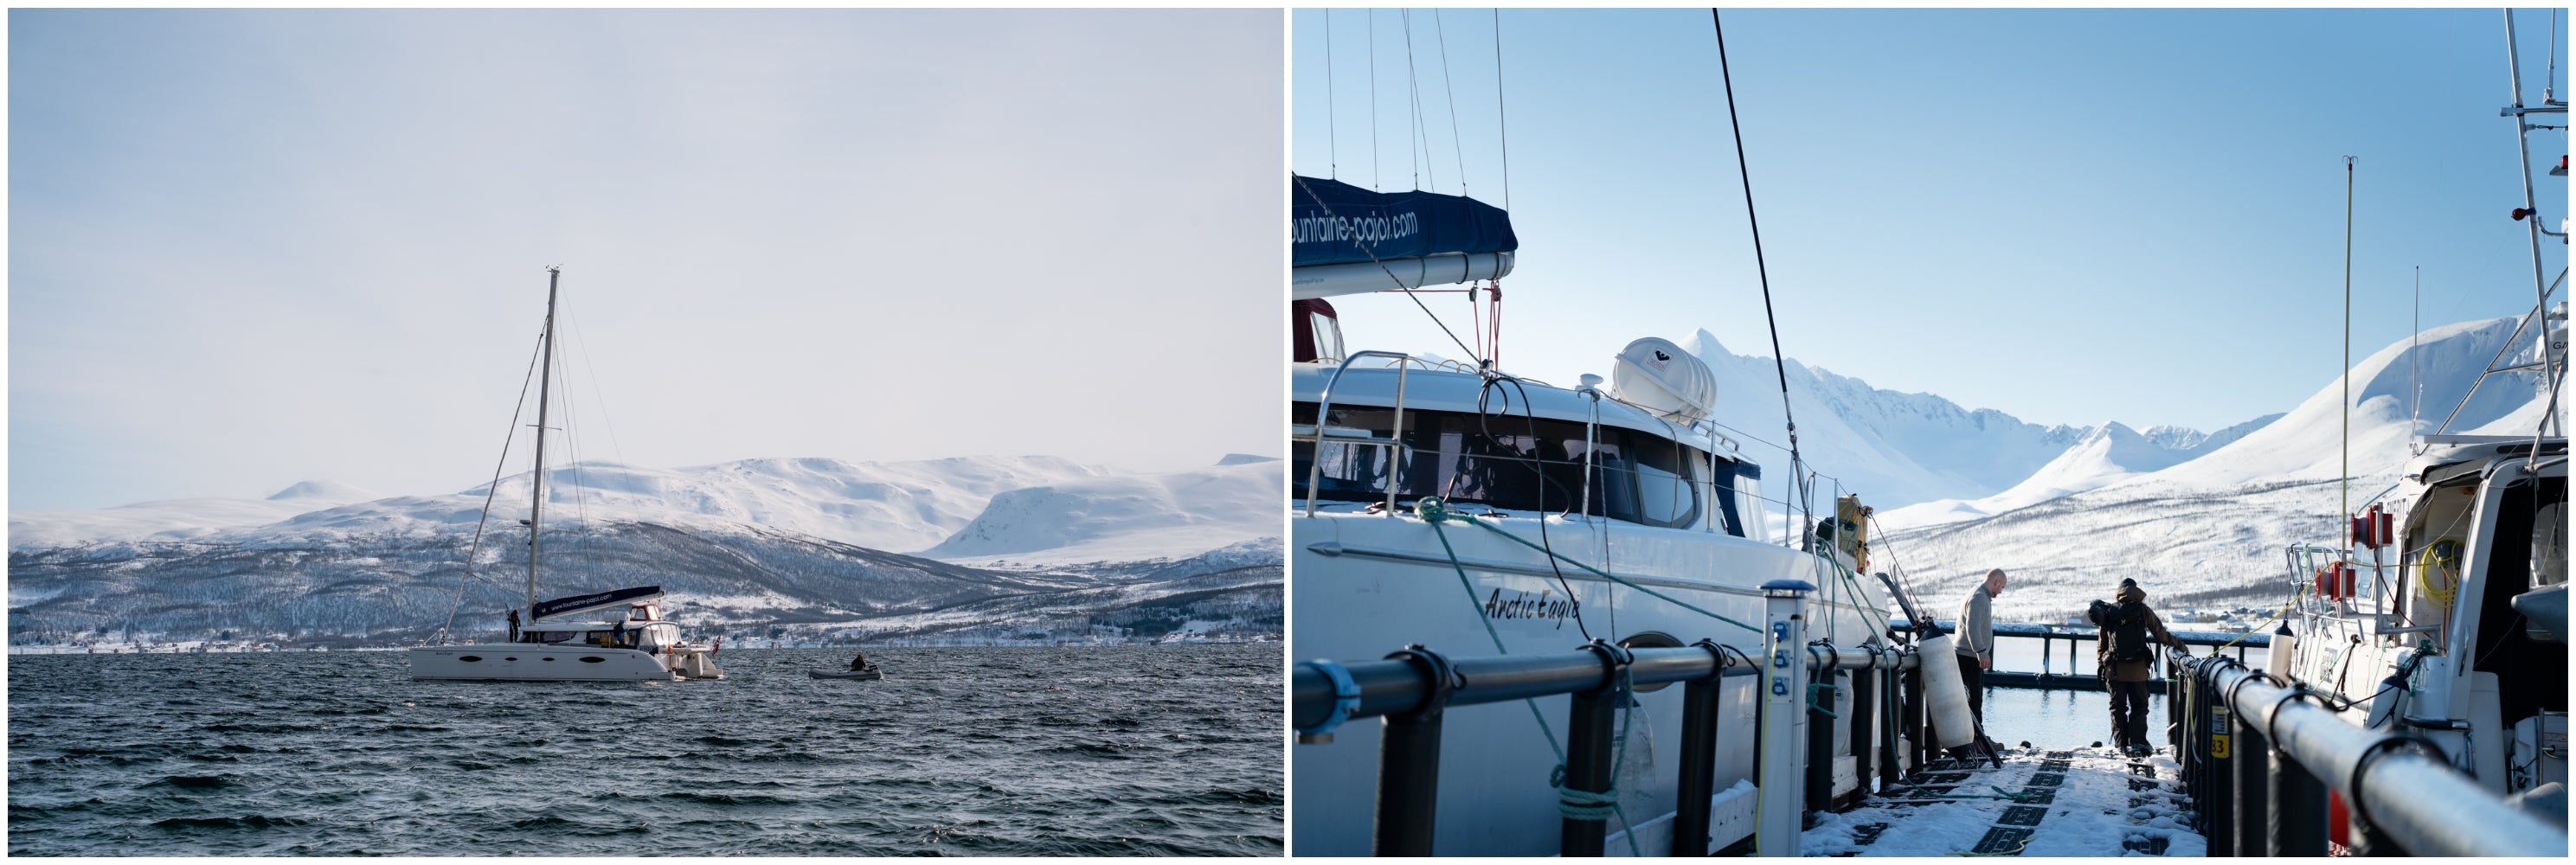 Collage of images of the Arctic Eagle, Max's 48 foot catamaran acting as their expedition vehicle for their ski trip in the Lyngen Alps.